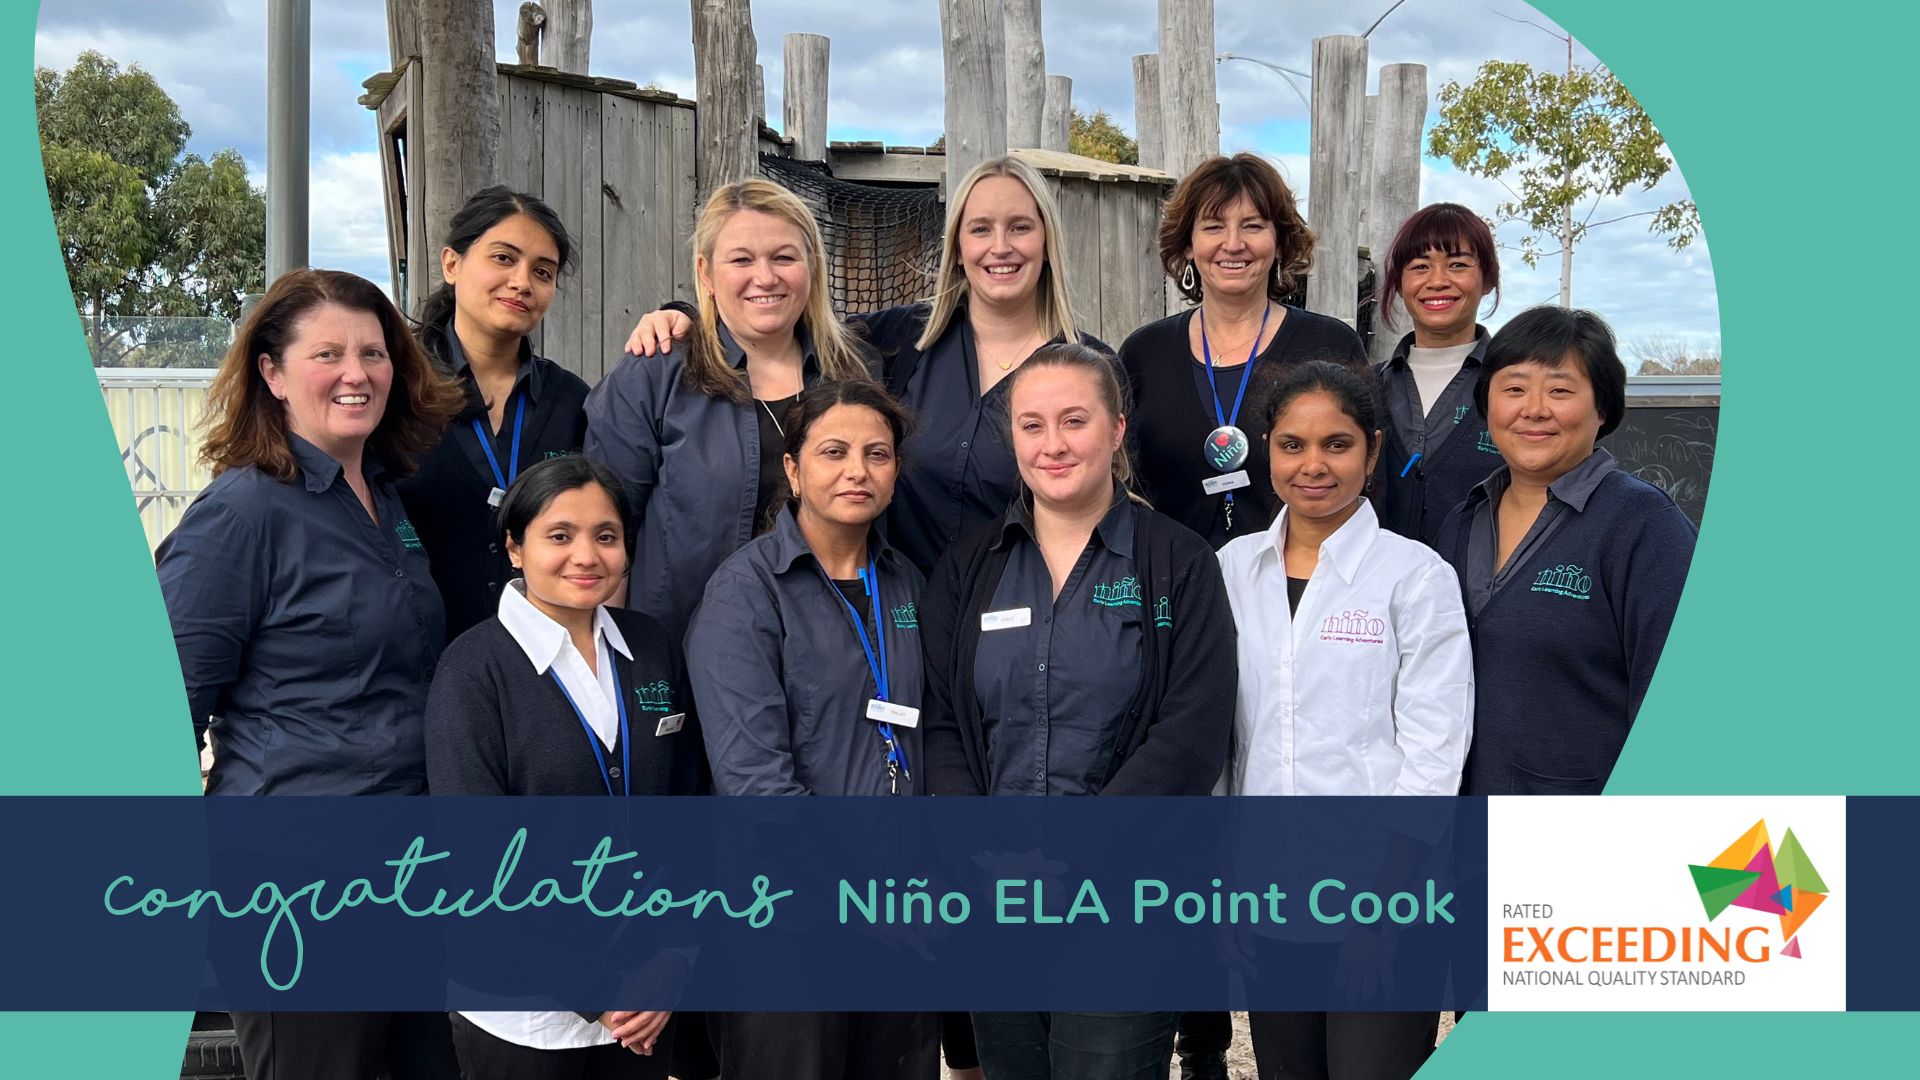 Nino ELA Point Cook Rated Exceeding